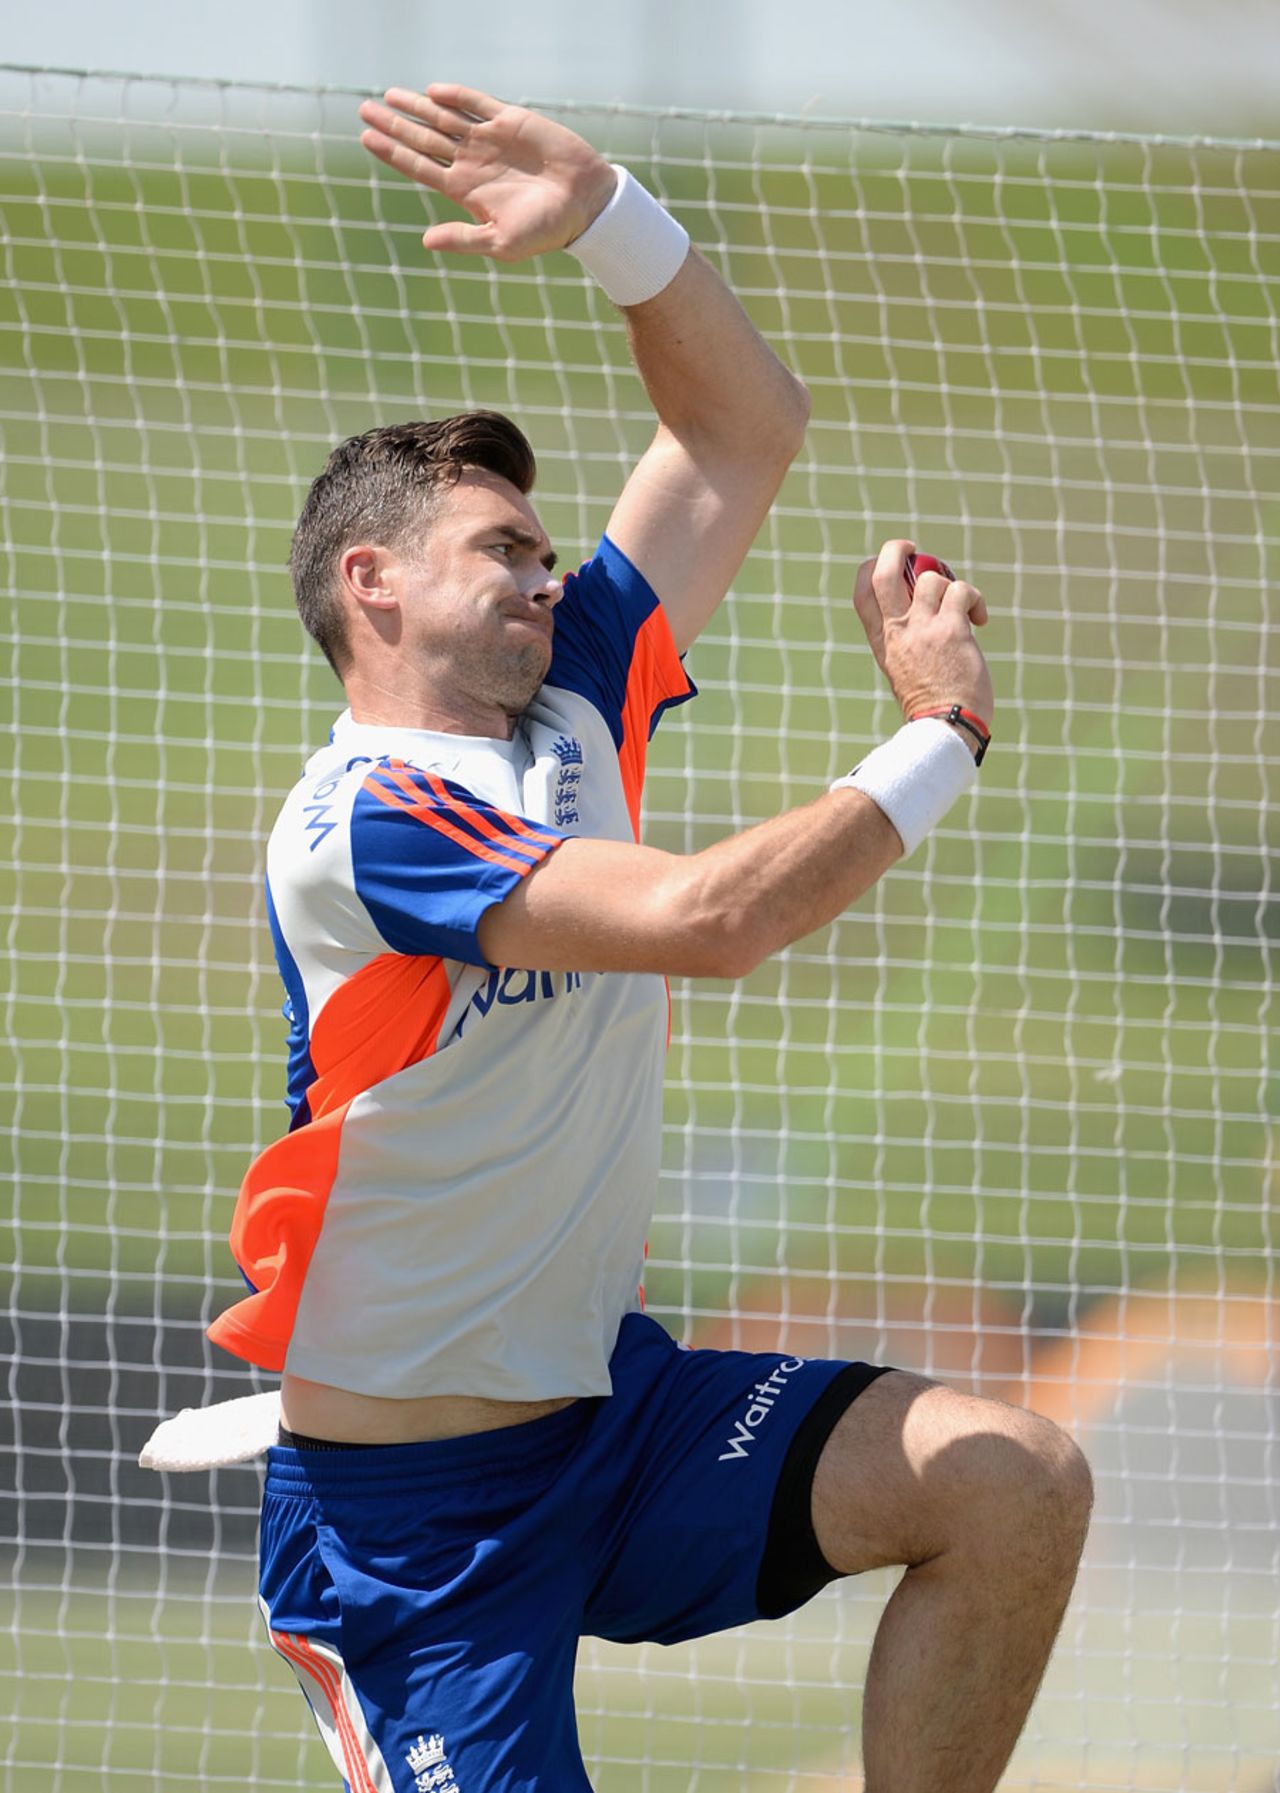 James Anderson bowls in the nets ahead of the first Test, Abu Dhabi, October 11, 2015